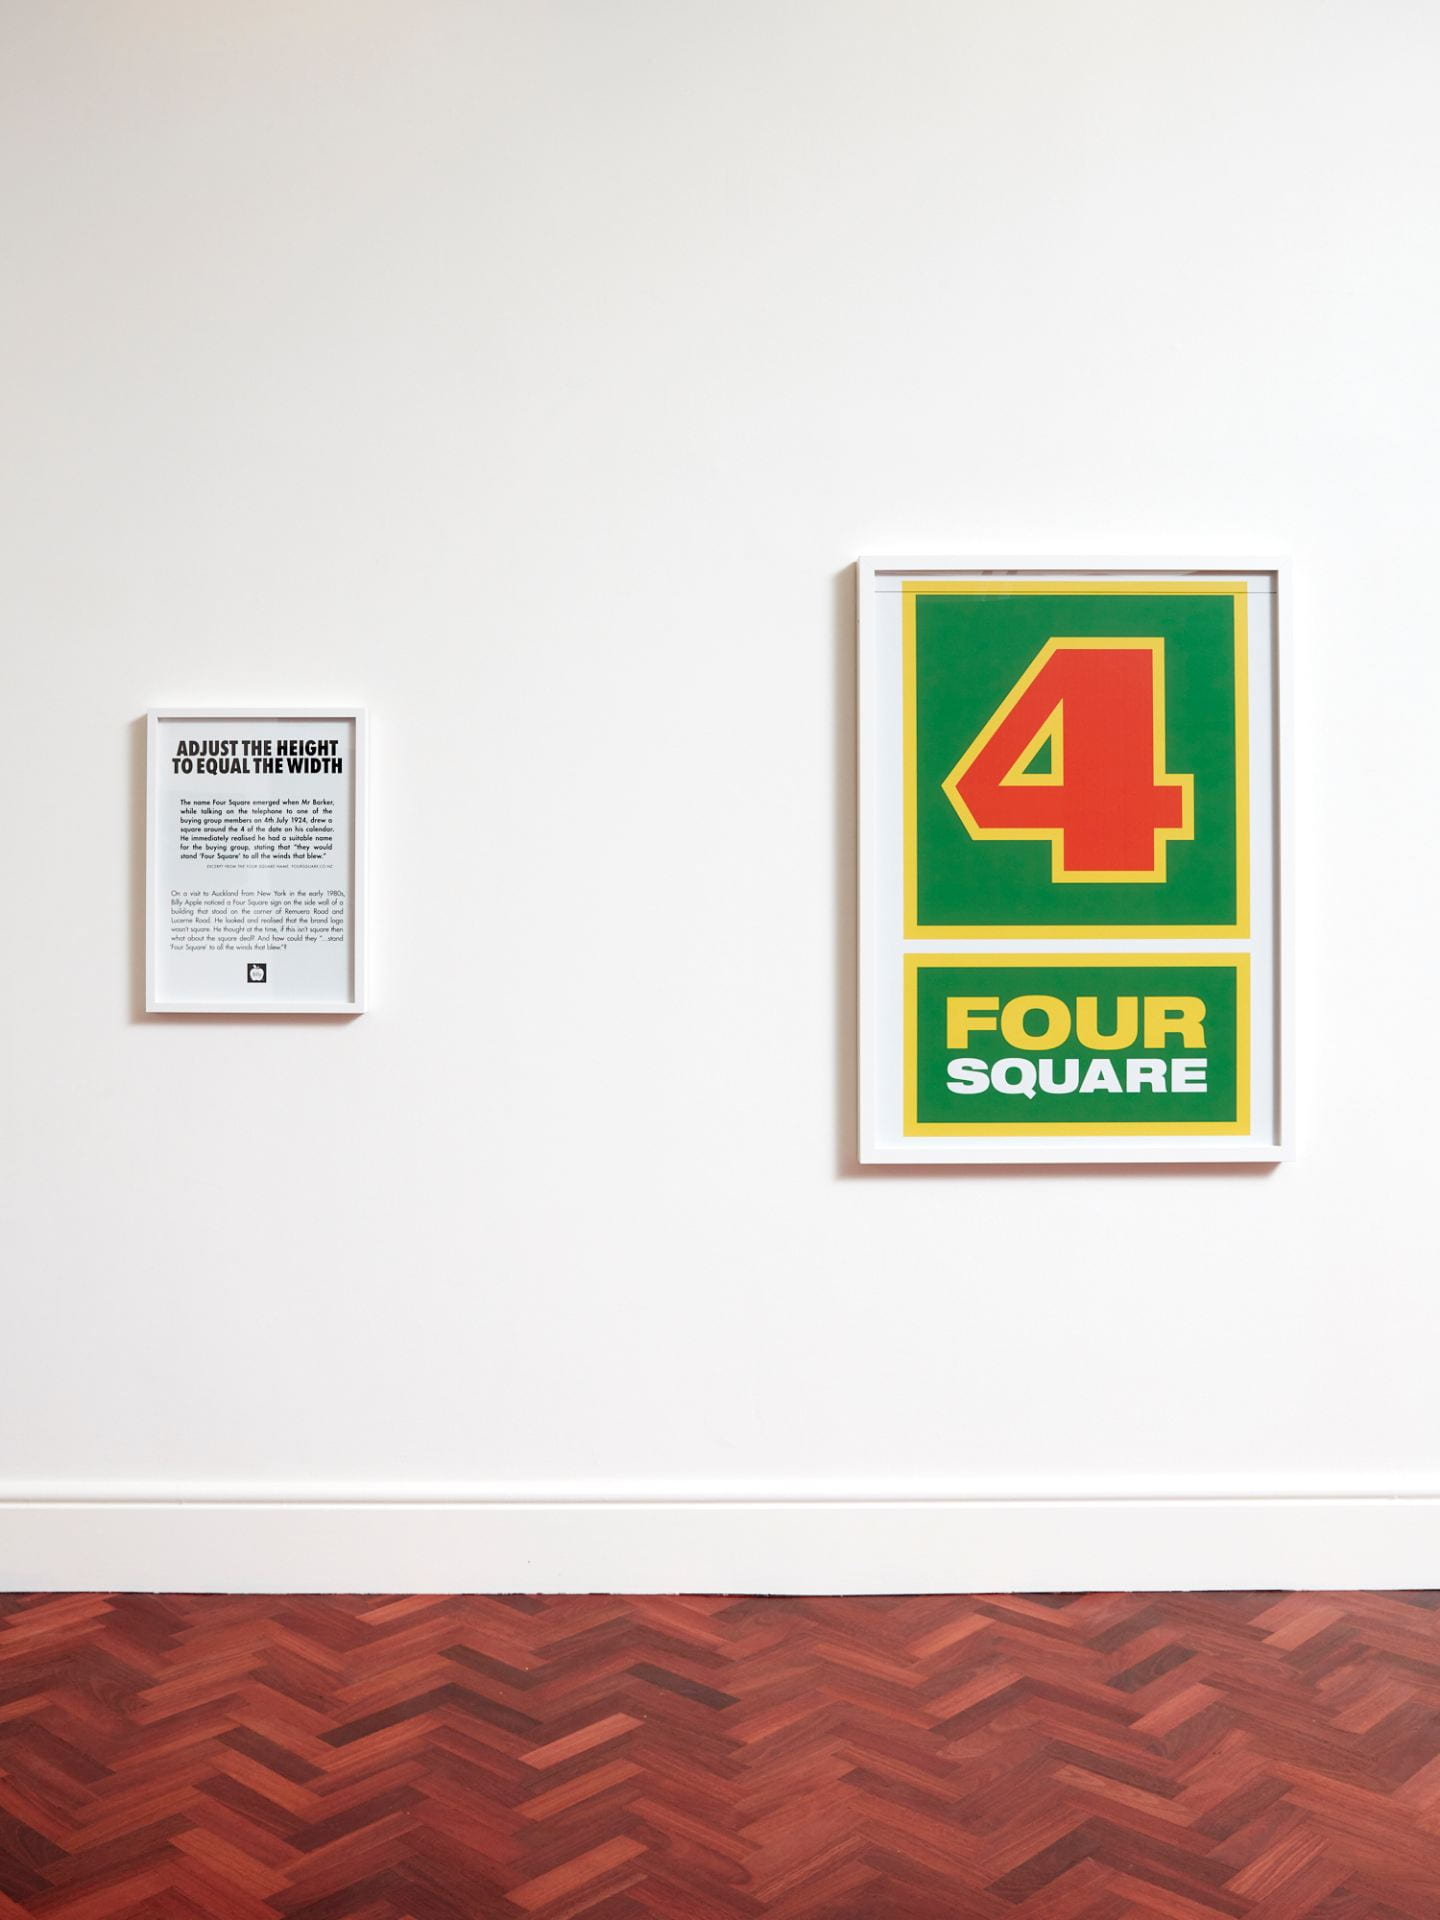 Two framed works mounted on a gallery wall. The left artwork contains black text on a white background, not legible from this distance, but which explains that the Four Square logo is not actually a perfect square. The right artwork is a replica of the Four Square logo, a red '4' surrounding by green with 'Four Square' written in yellow underneath.